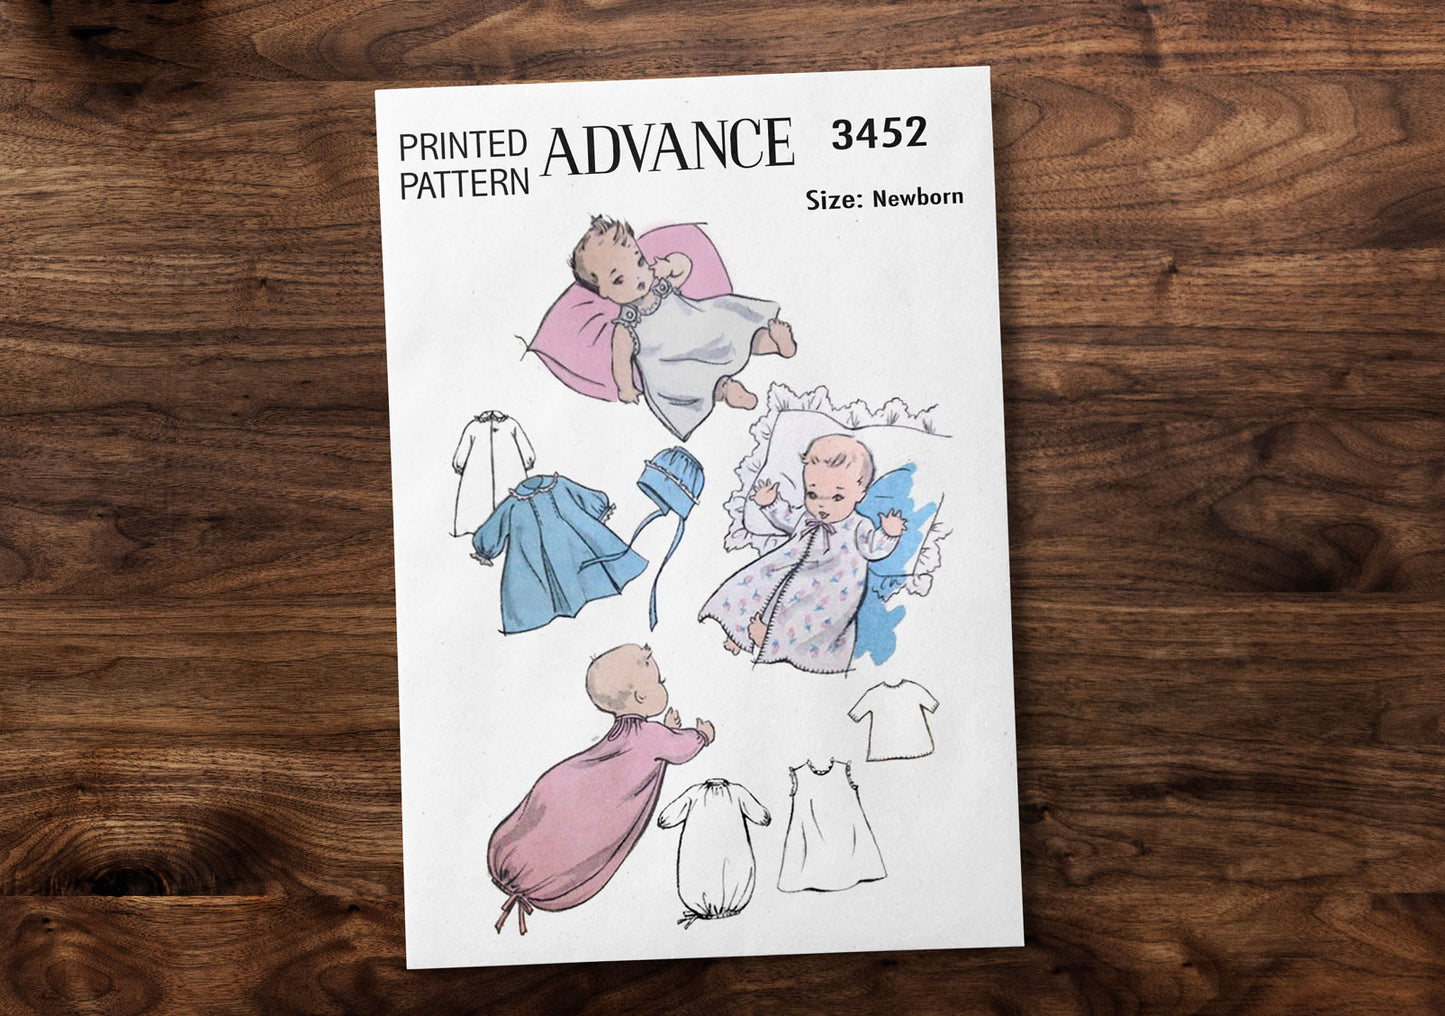 3452AP - Newborn Baby's Sleeper Gown, Dress, Top and Shorts Onsie Style - Vintage Pattern 1940s *REPRODUCTION*